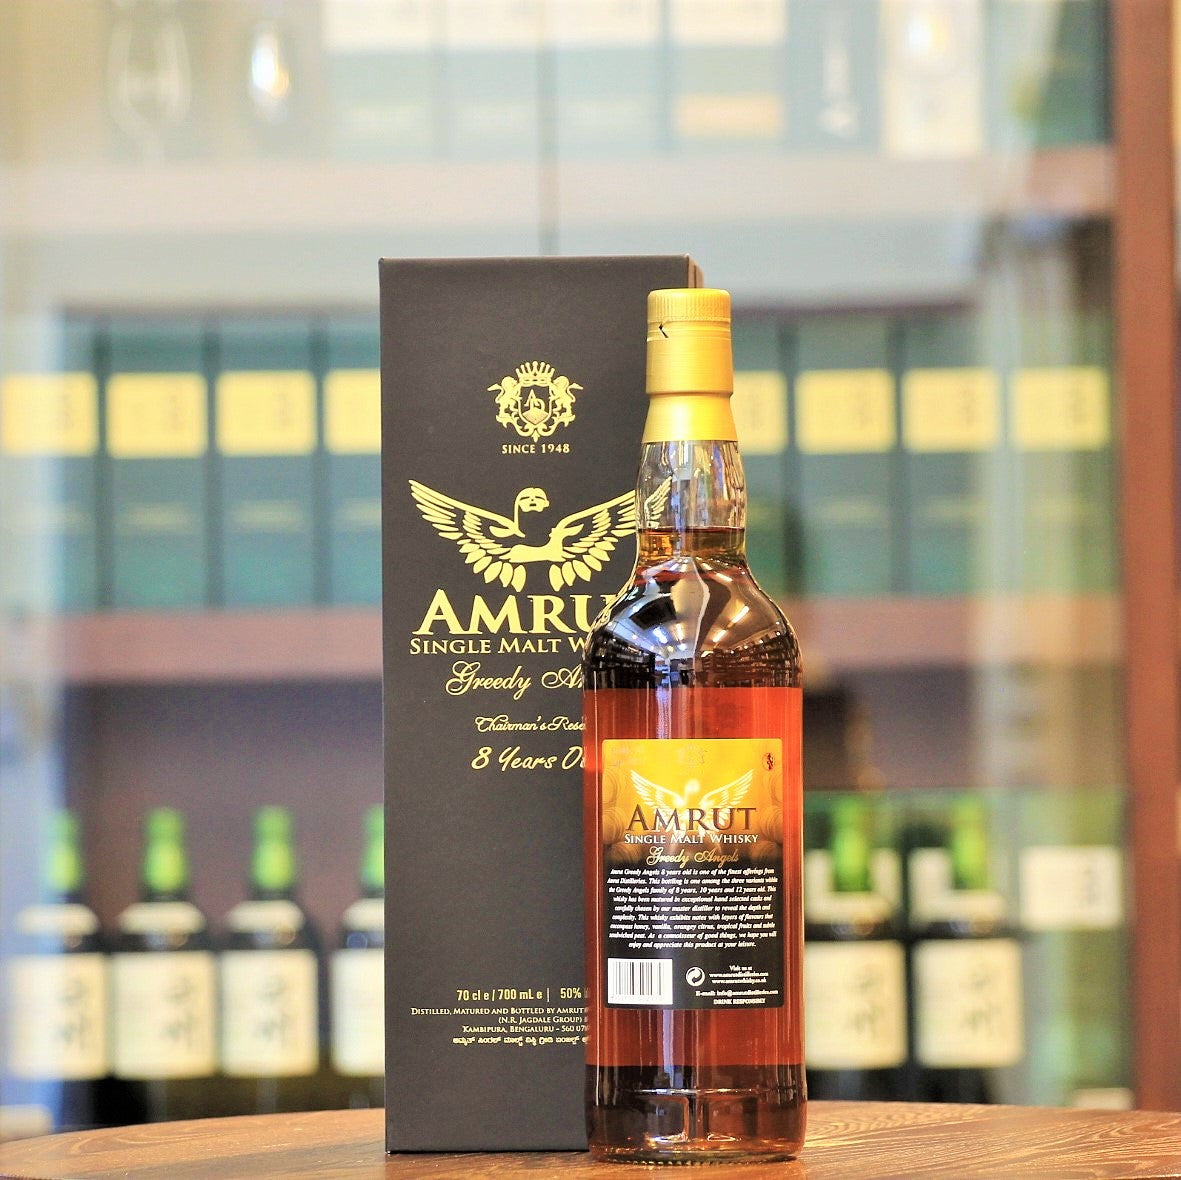 Released to celebrate Amrut Distillery Chairman, Mr. Neel Jagdale's 60th birthday, only 1350 bottles were released in 2017. This was the oldest age statement at the time of its released and is part of the Greedy Angel's Series of bottlings (including a10 year and 12 year old release).